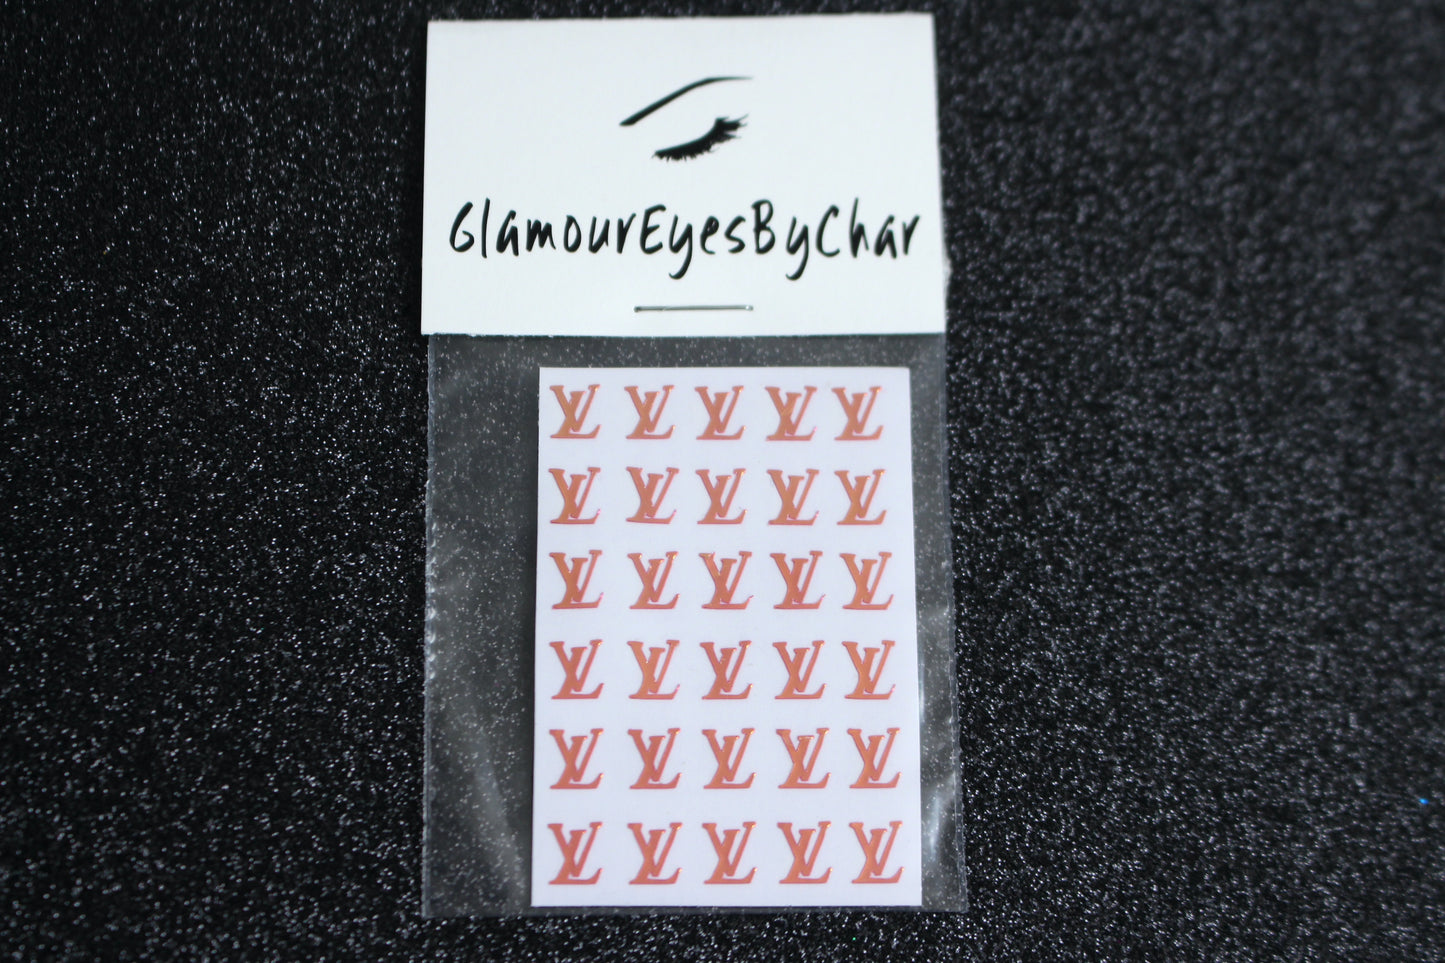 Spice up your nails with these unique LV designer inspired nail decals. They can be used on natural or acrylic nails. You can also apply them on top of regular or gel/shellac nail polish. These handmade decals can also be used for body art or any DIY project. The pack contains 30 decals and is available in 4 different colours.   Size: ﻿W= 0.21 inches, H= 0.252 inches  Tip: Apply some of our glitter on your nails to really GLAMOUREYES your look.